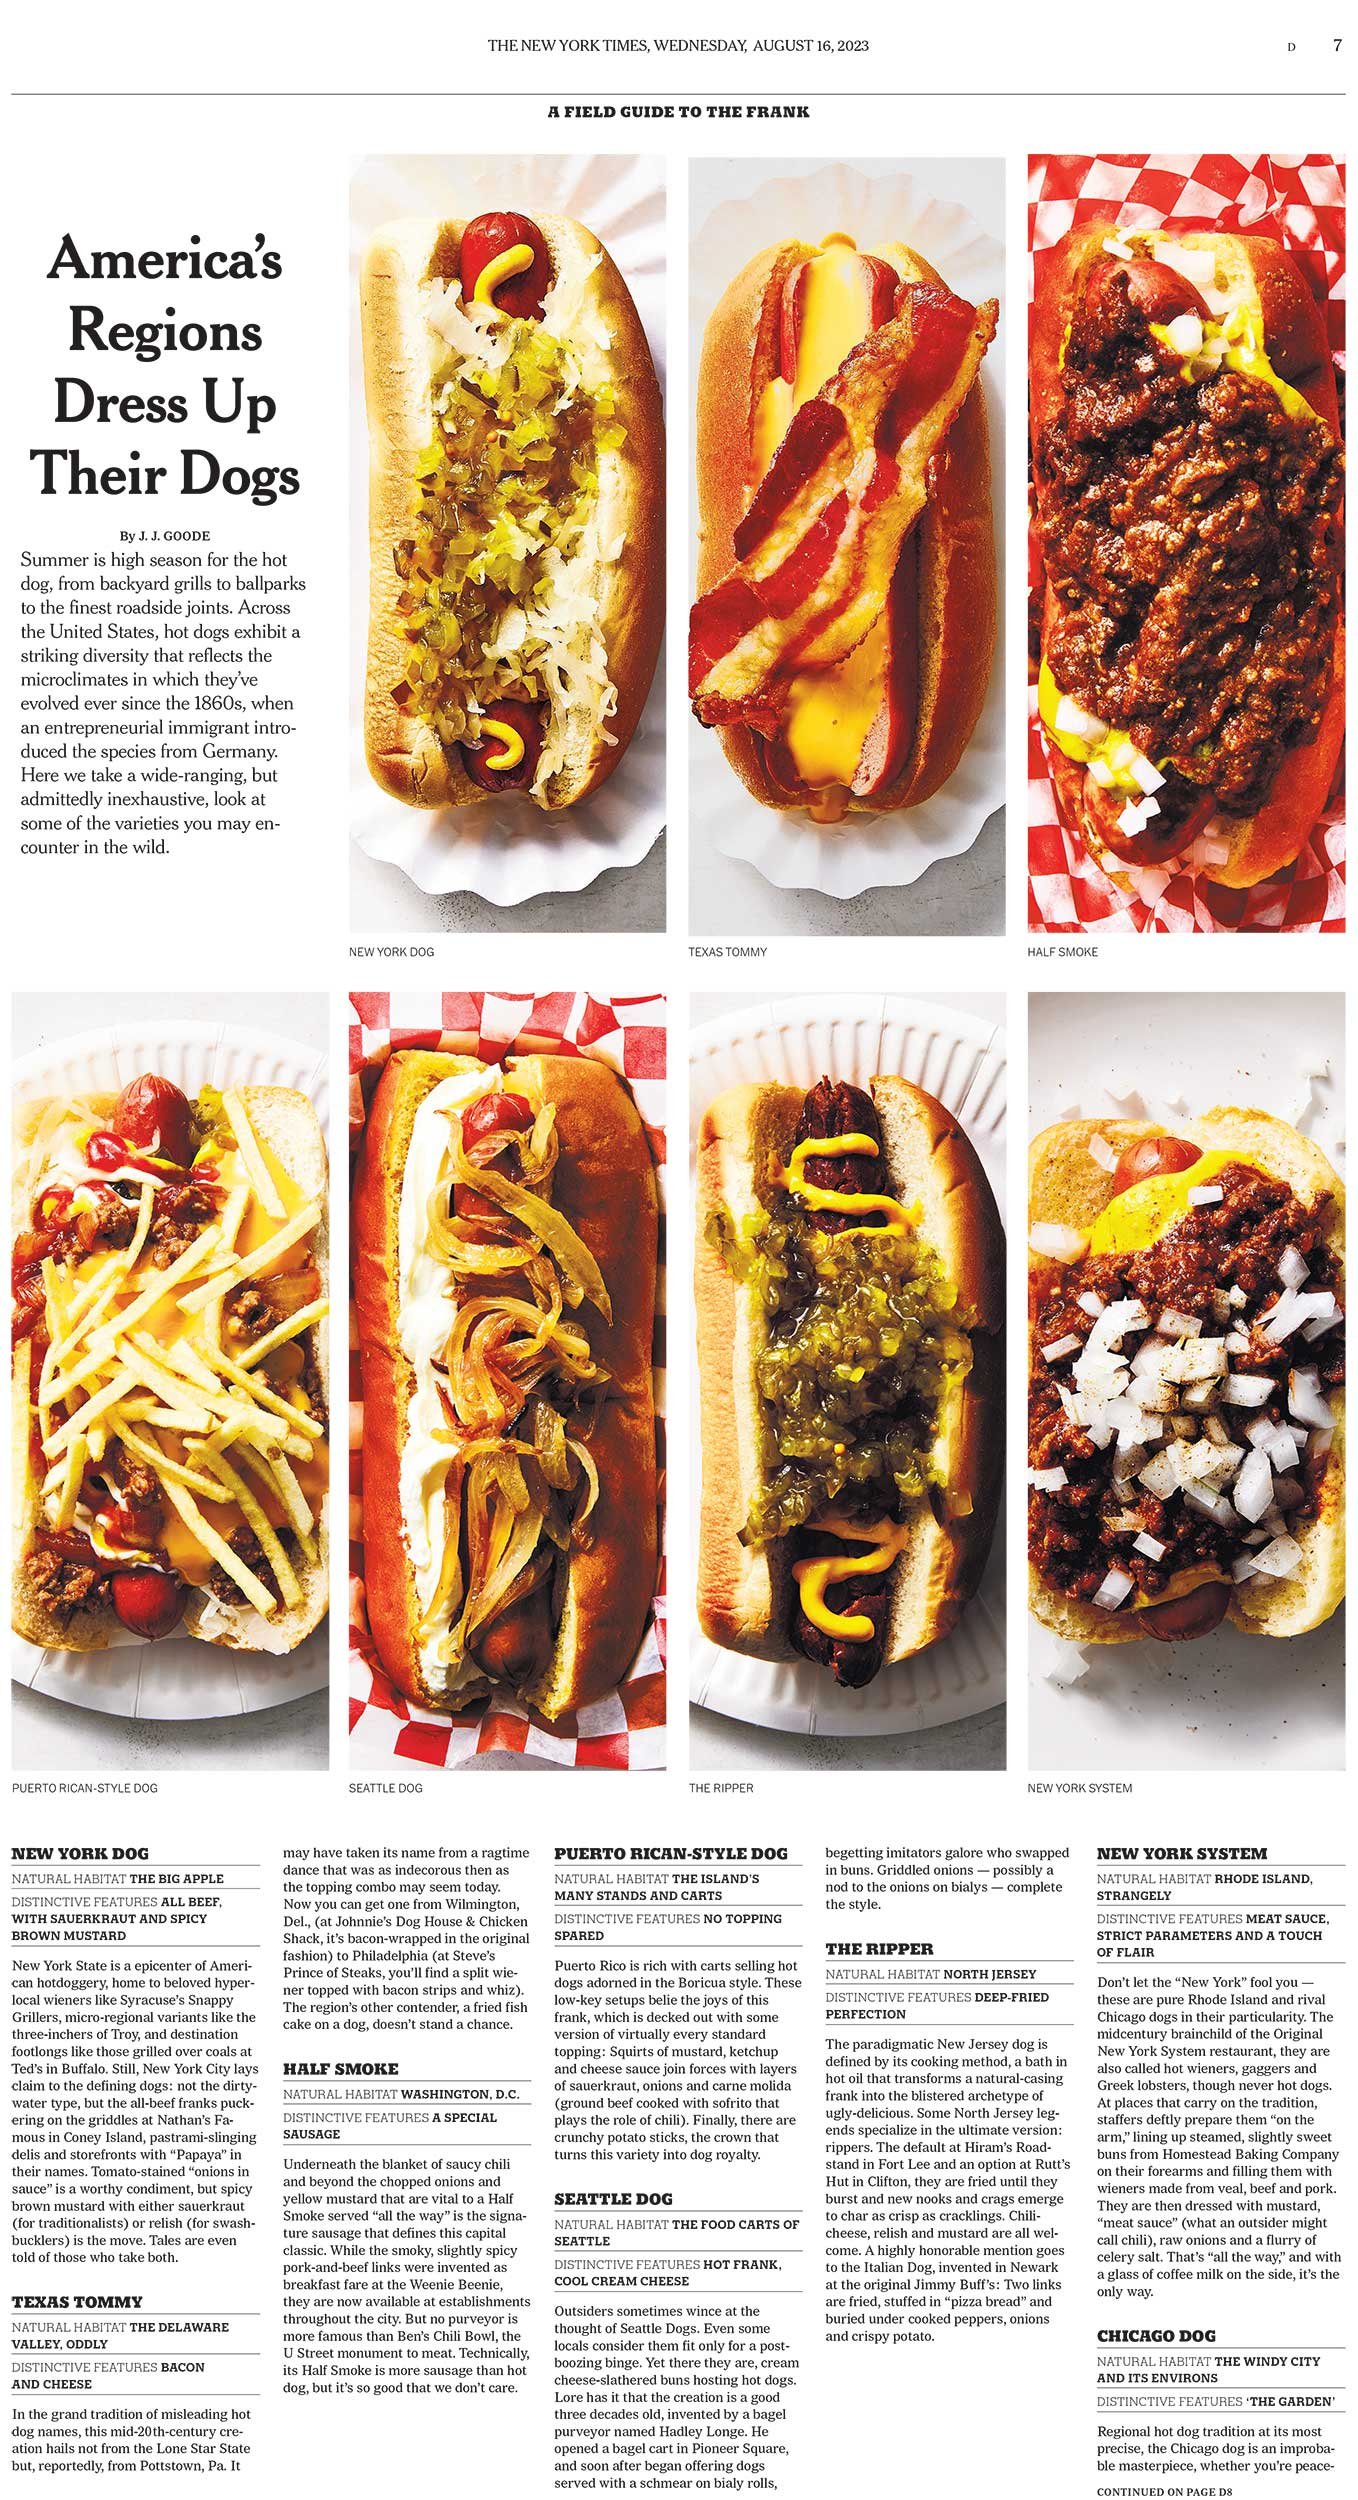 nyc-nj-food-editorial-photographer-nytimes-cooking-hot-dogs.jpg